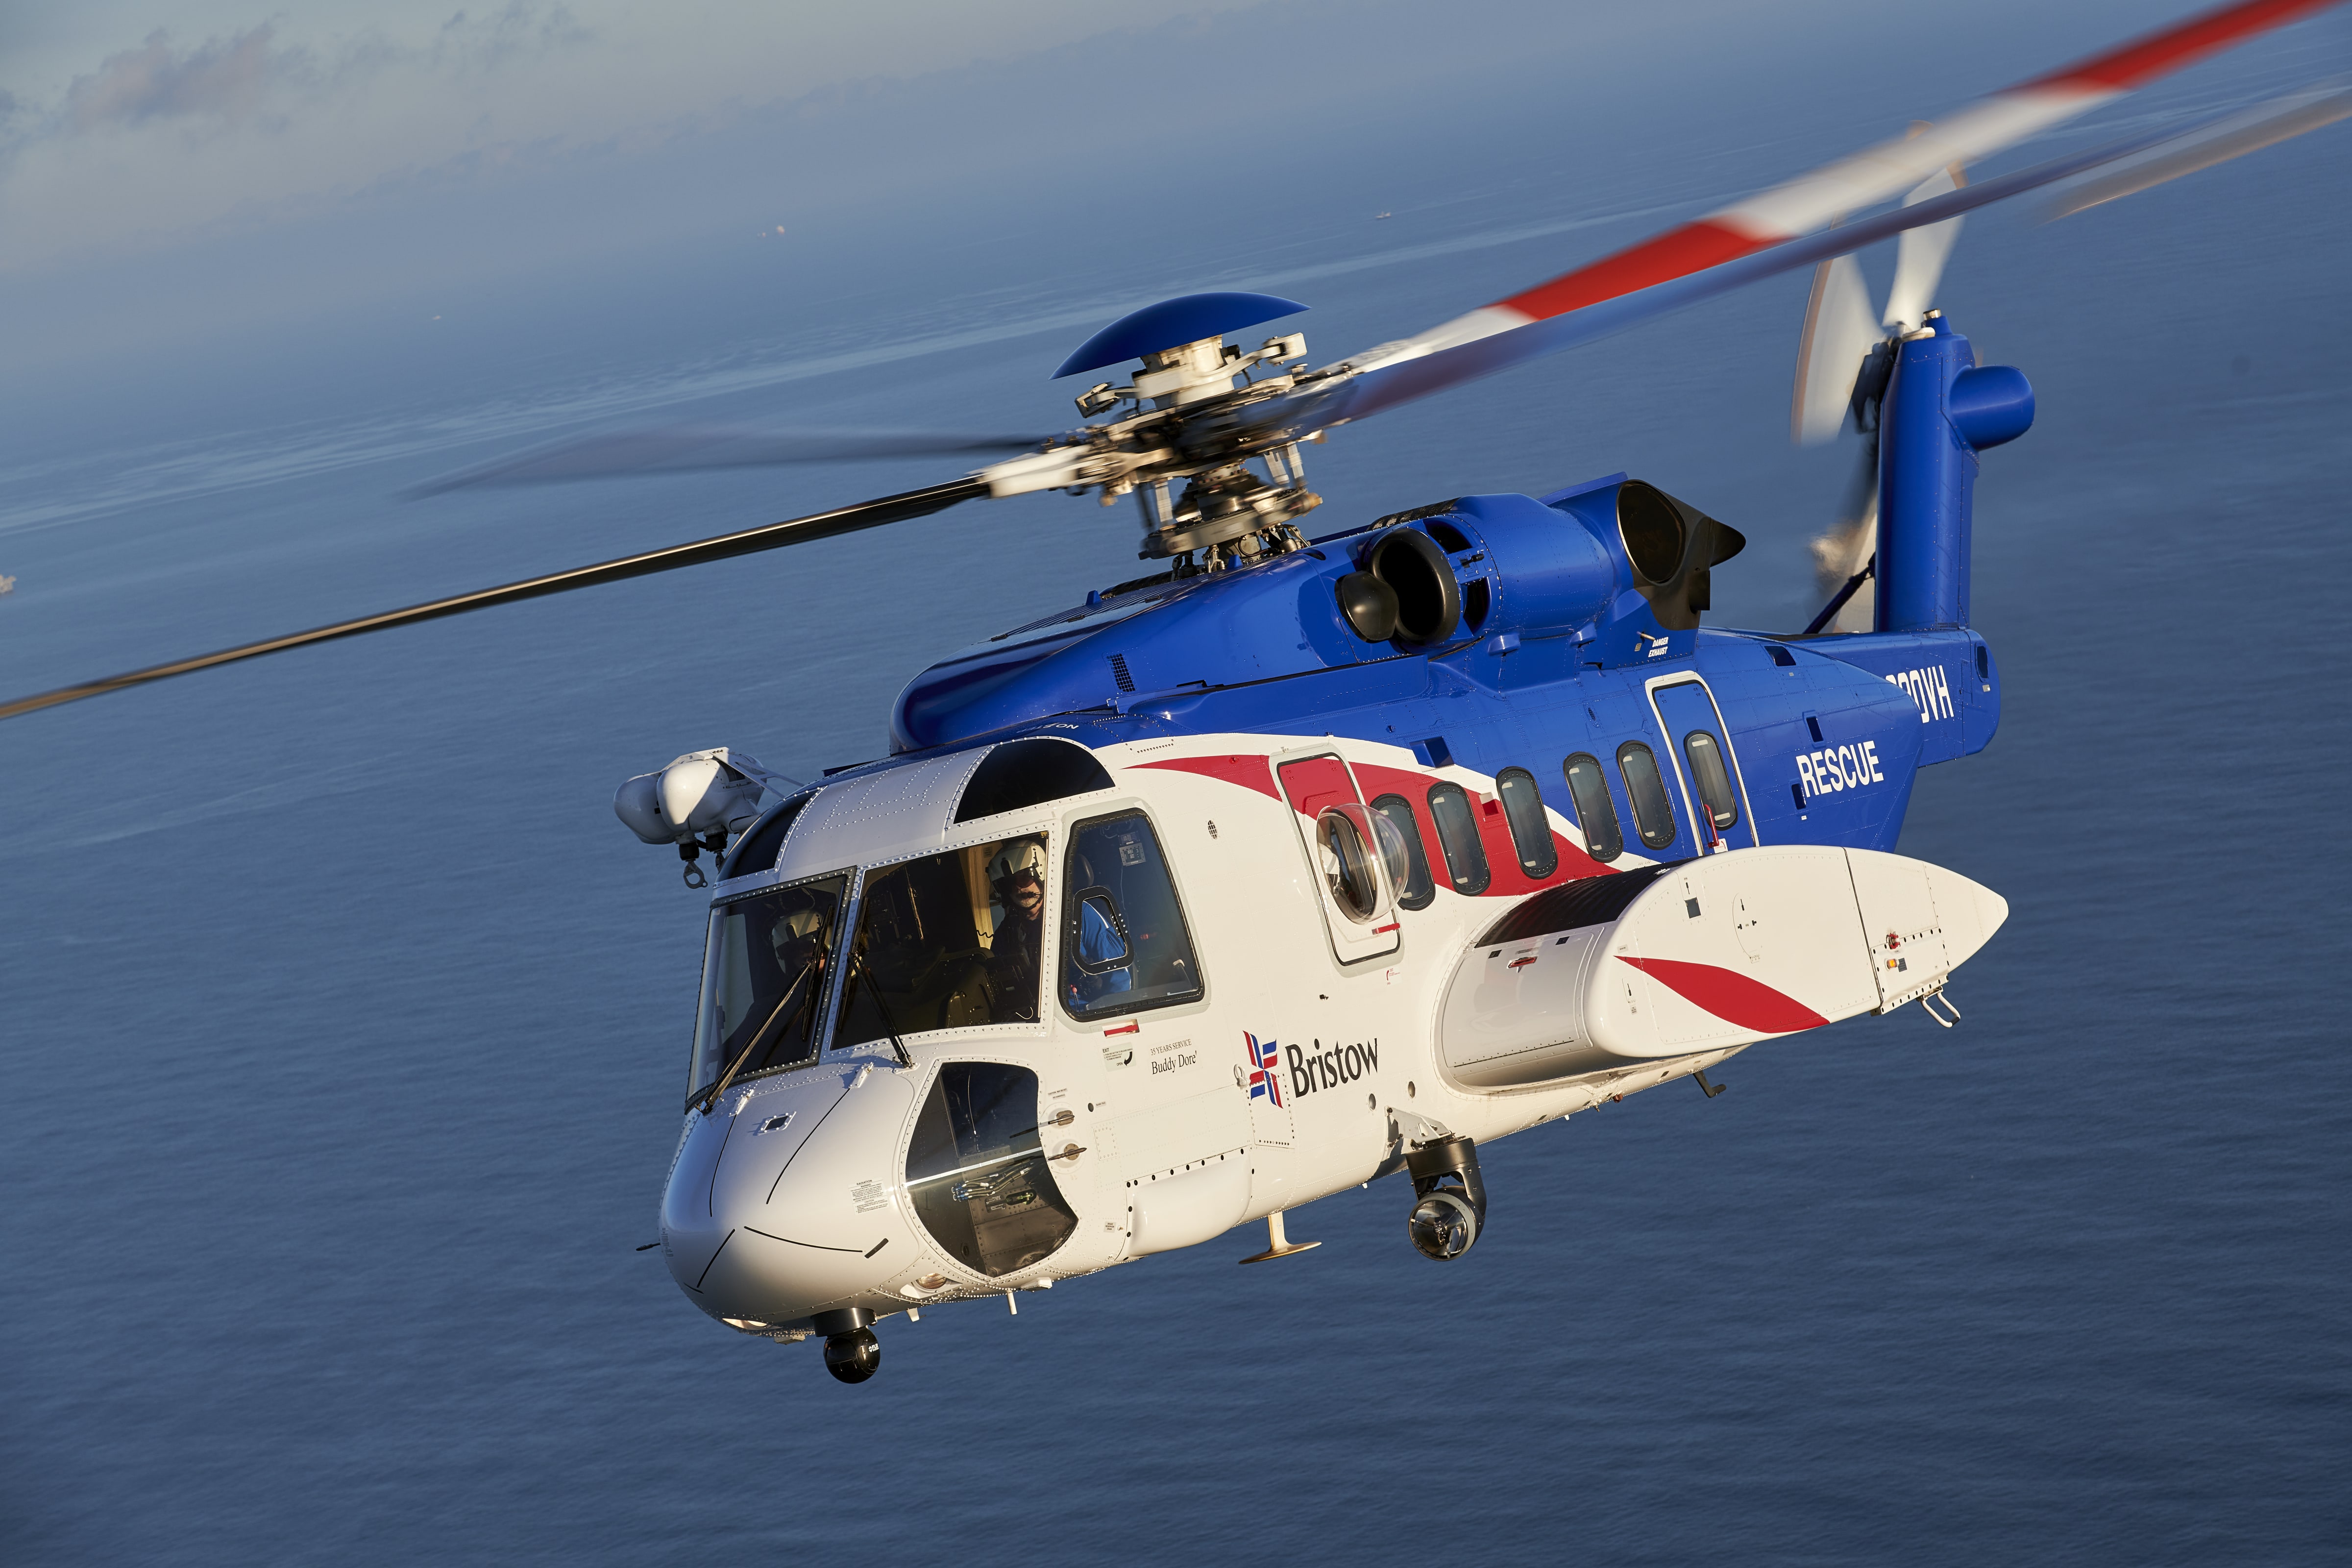 One person died after Bristow Search and Rescue Sikorsky 92 (S92) helicopter crashed into Norwegian North Sea during a training exercise in February